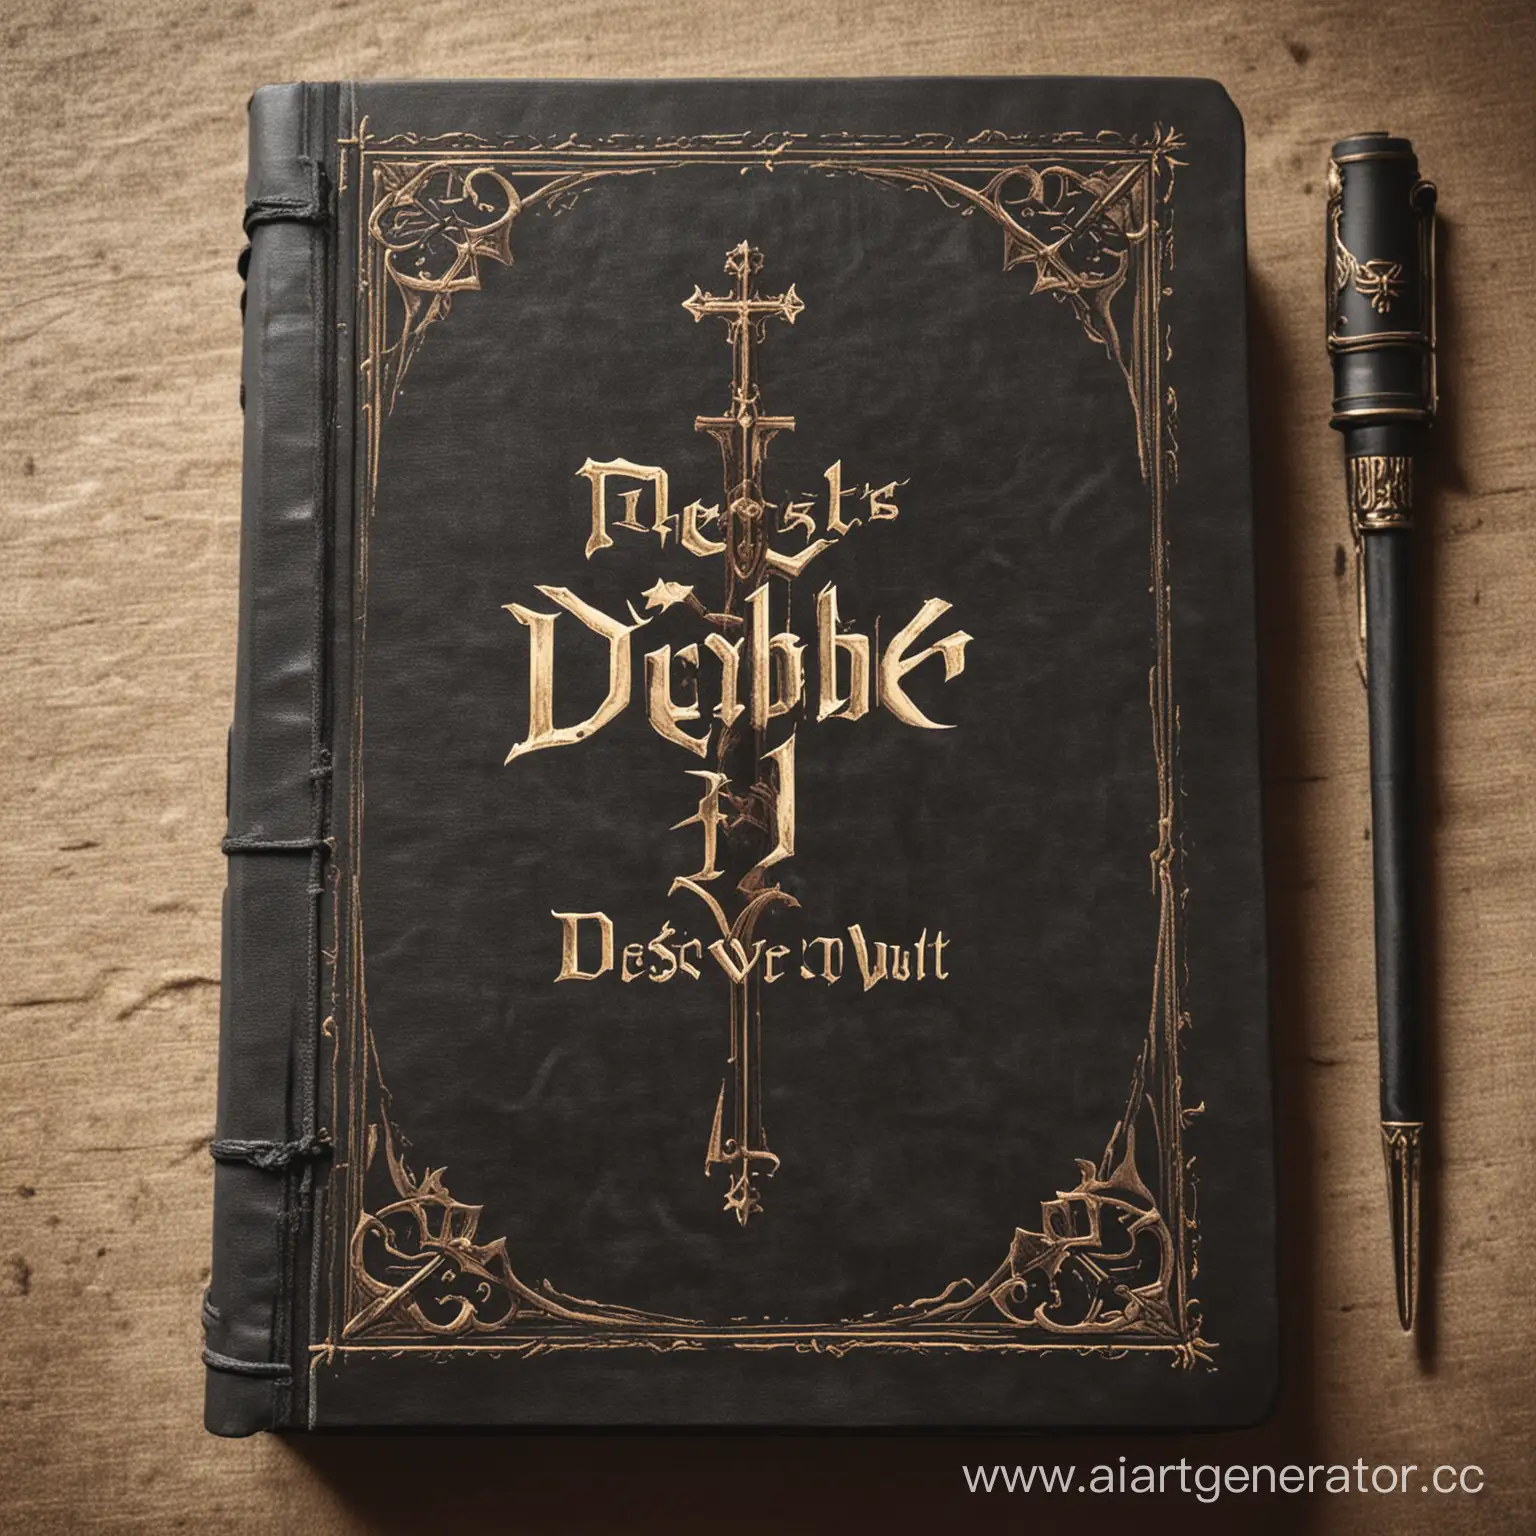 Illustrated-Cover-of-Priests-Bible-for-DND-Deus-Vult-Inscription